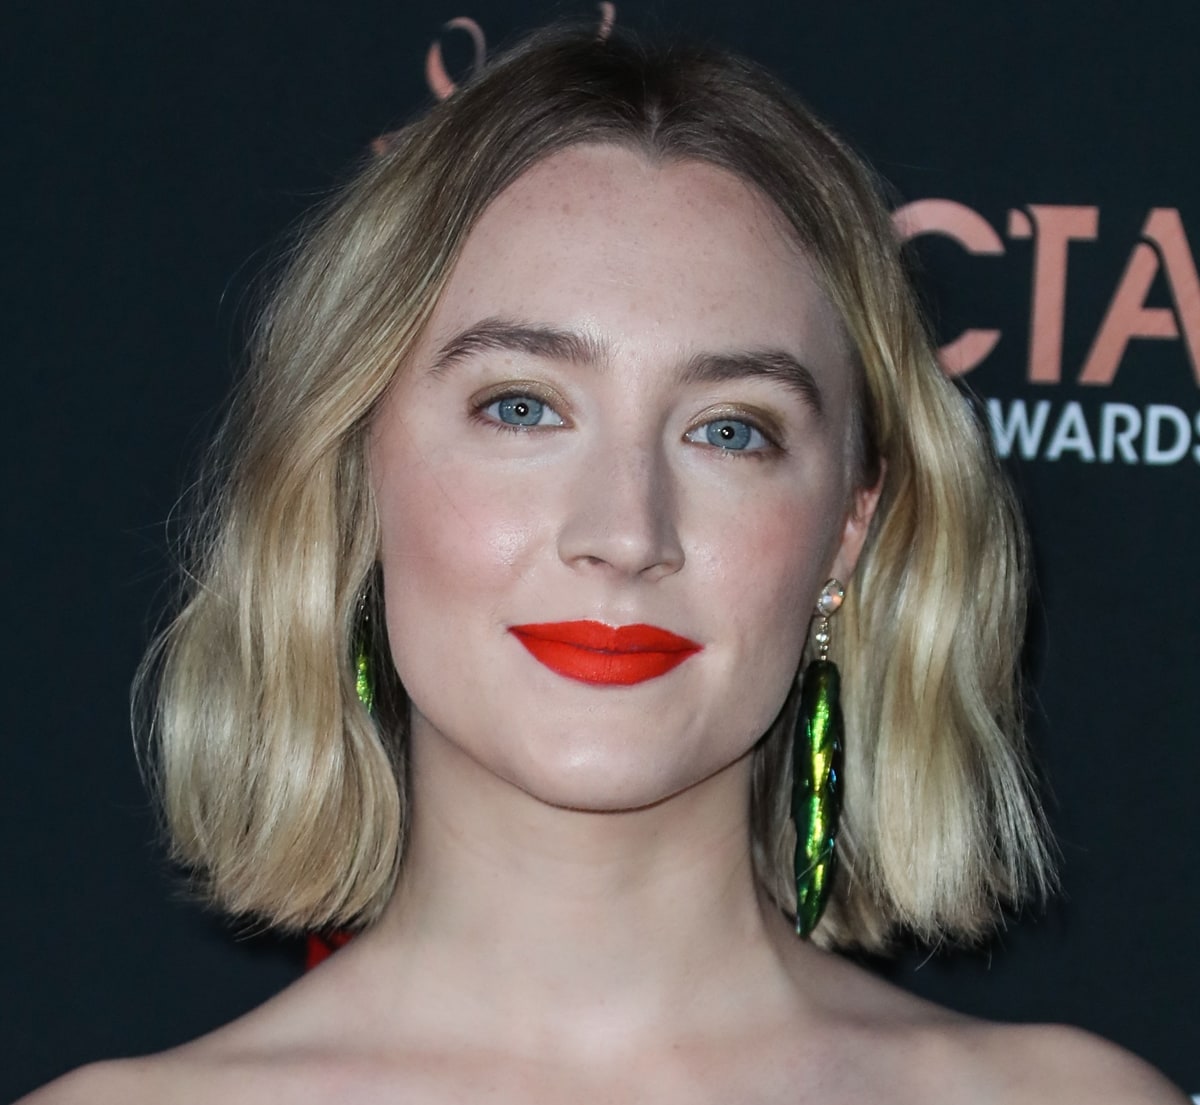 Saoirse Ronan wearing Jacquie Aiche pave diamond opal and beetle wing earrings